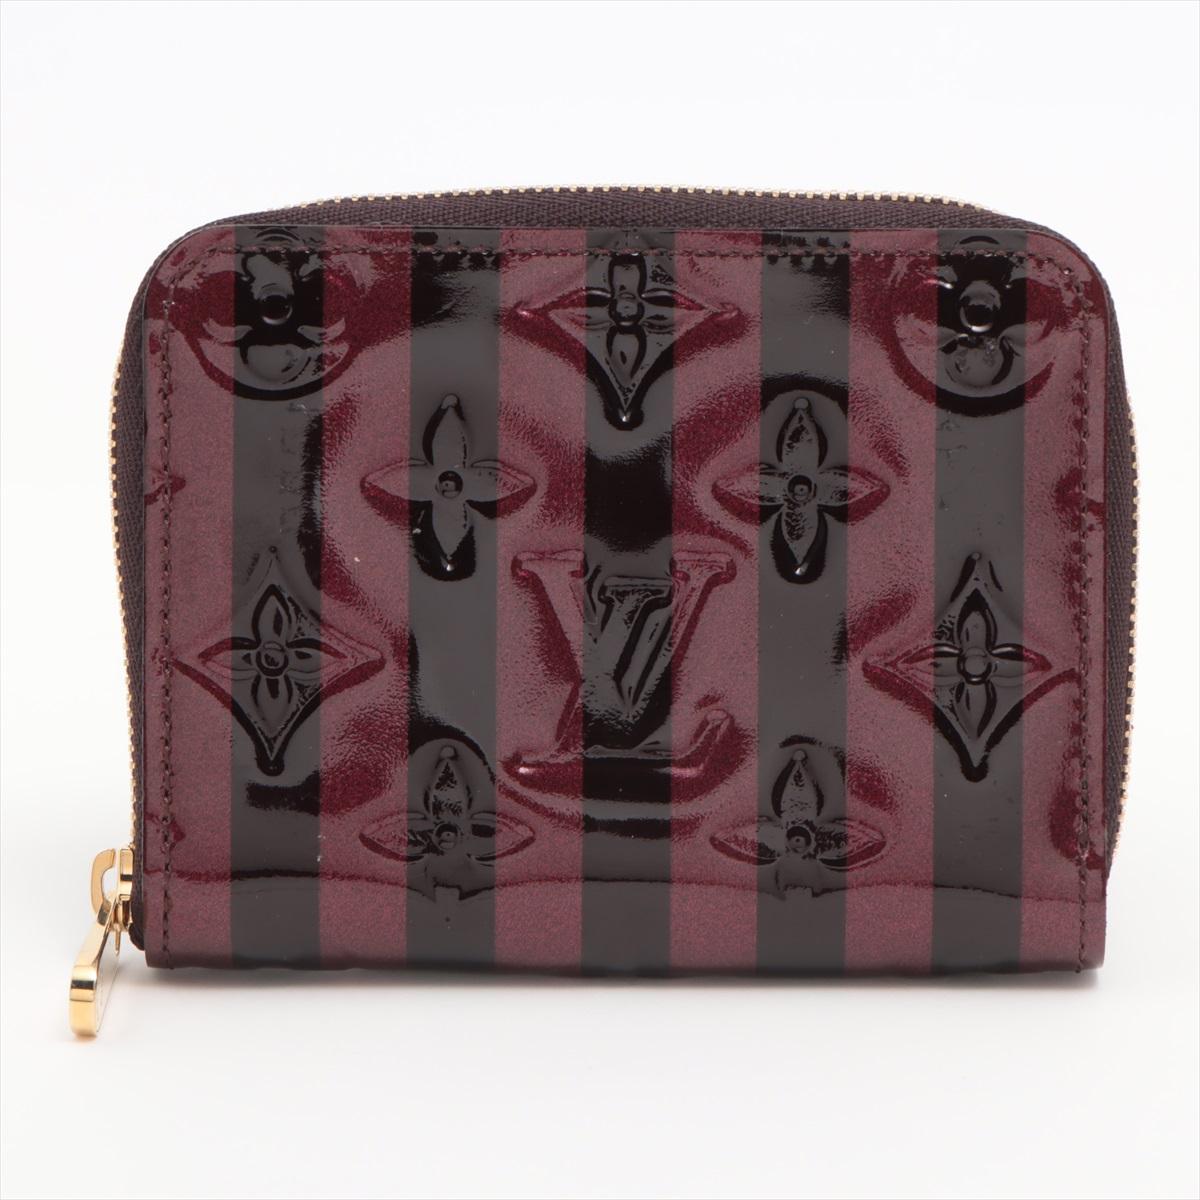 The Louis Vuitton Monogram Vernis Stripe Zippy Coin Purse in Amarante is an elegant and compact accessory that exudes modern sophistication. Crafted from the iconic Vernis patent leather, the wallet features a refined stripe pattern in the deep